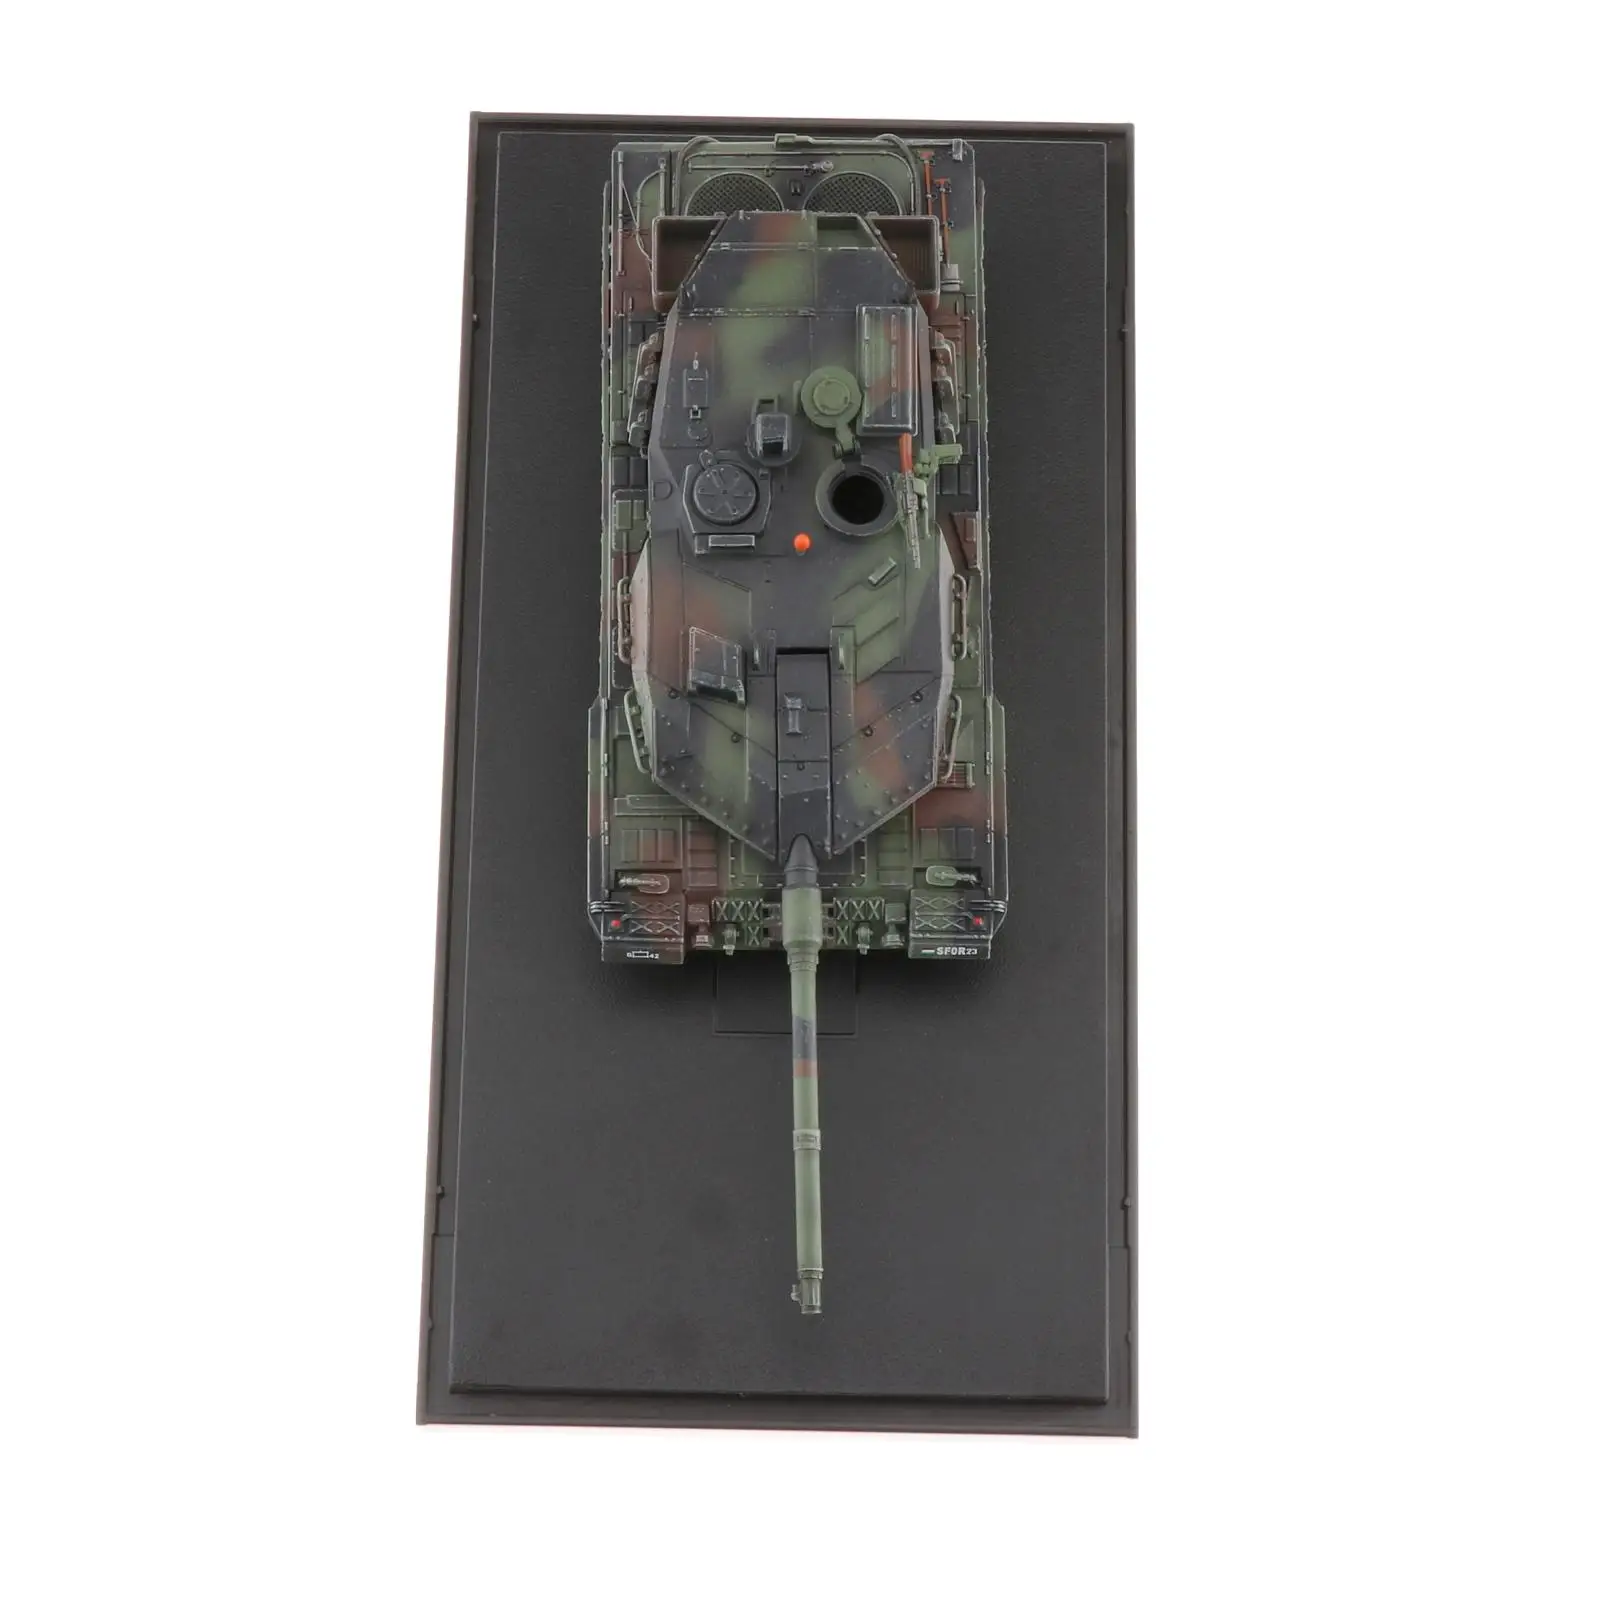 Diecast Alloy 1/72 Scale 4D Tank Leopard 2 A6NL Tank Armored Vehicles Model